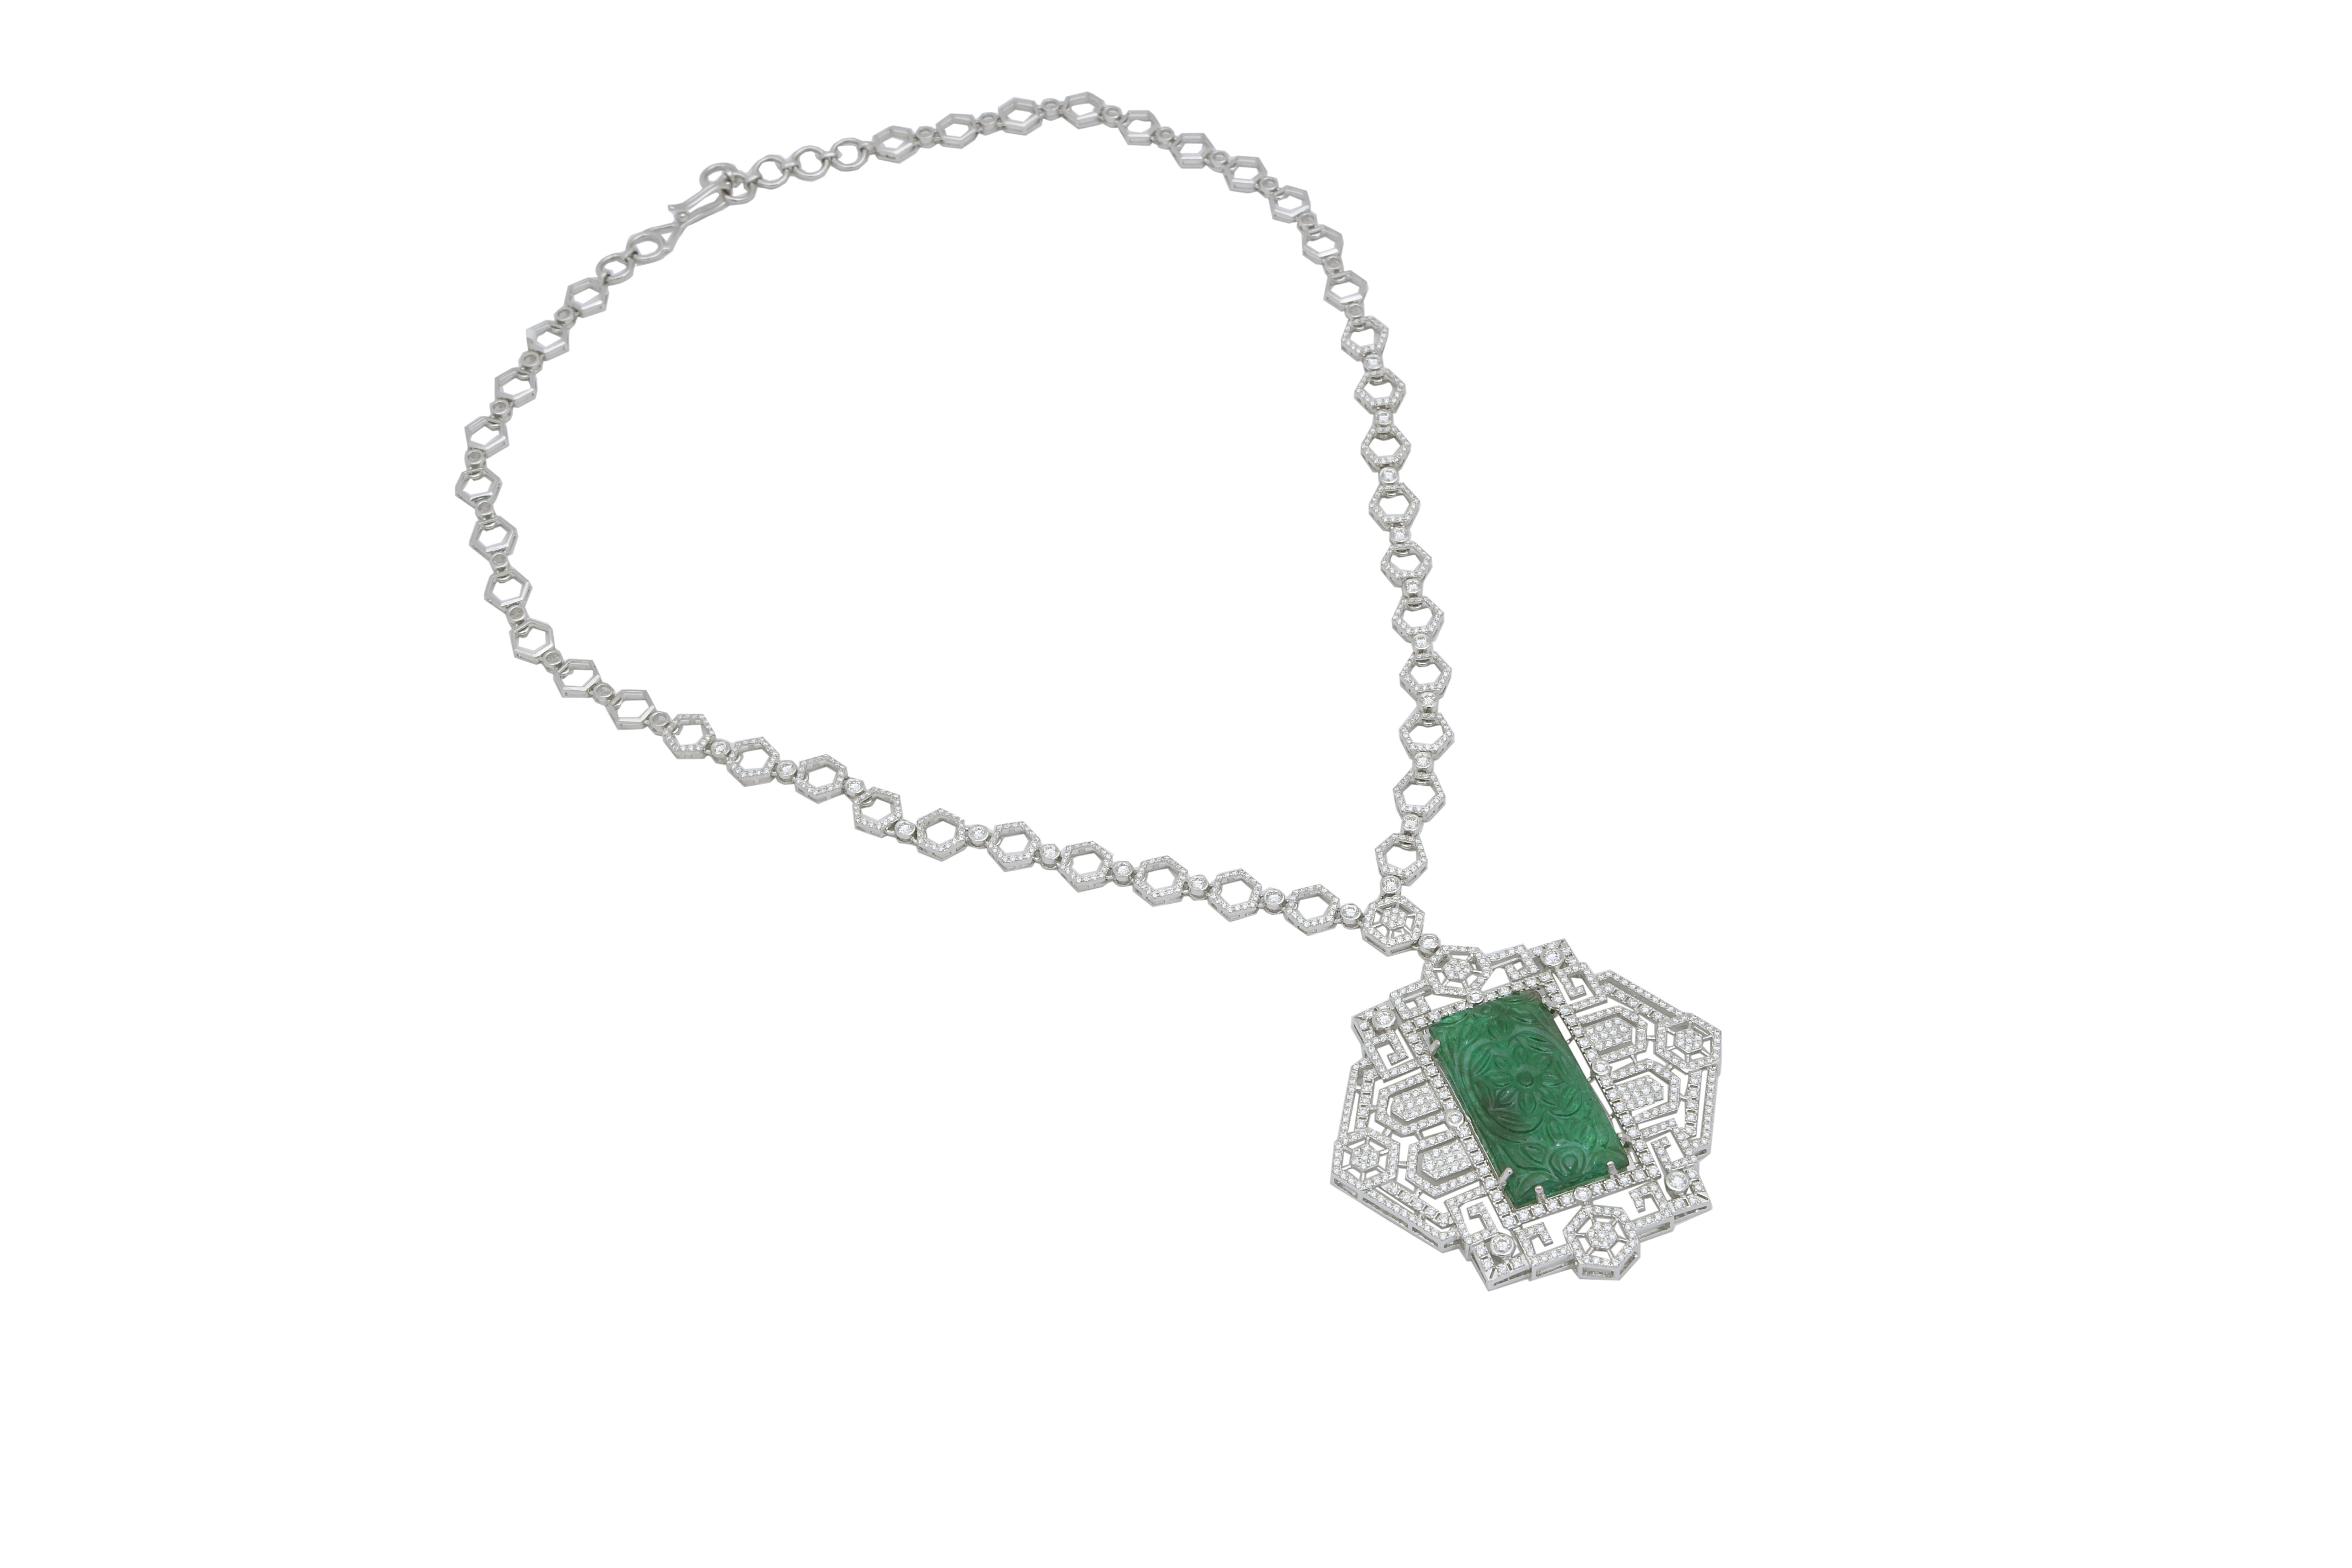 Women's Natural Emerald Necklace with 4.79 Carat Diamond & 22.14 Carat Emerald For Sale